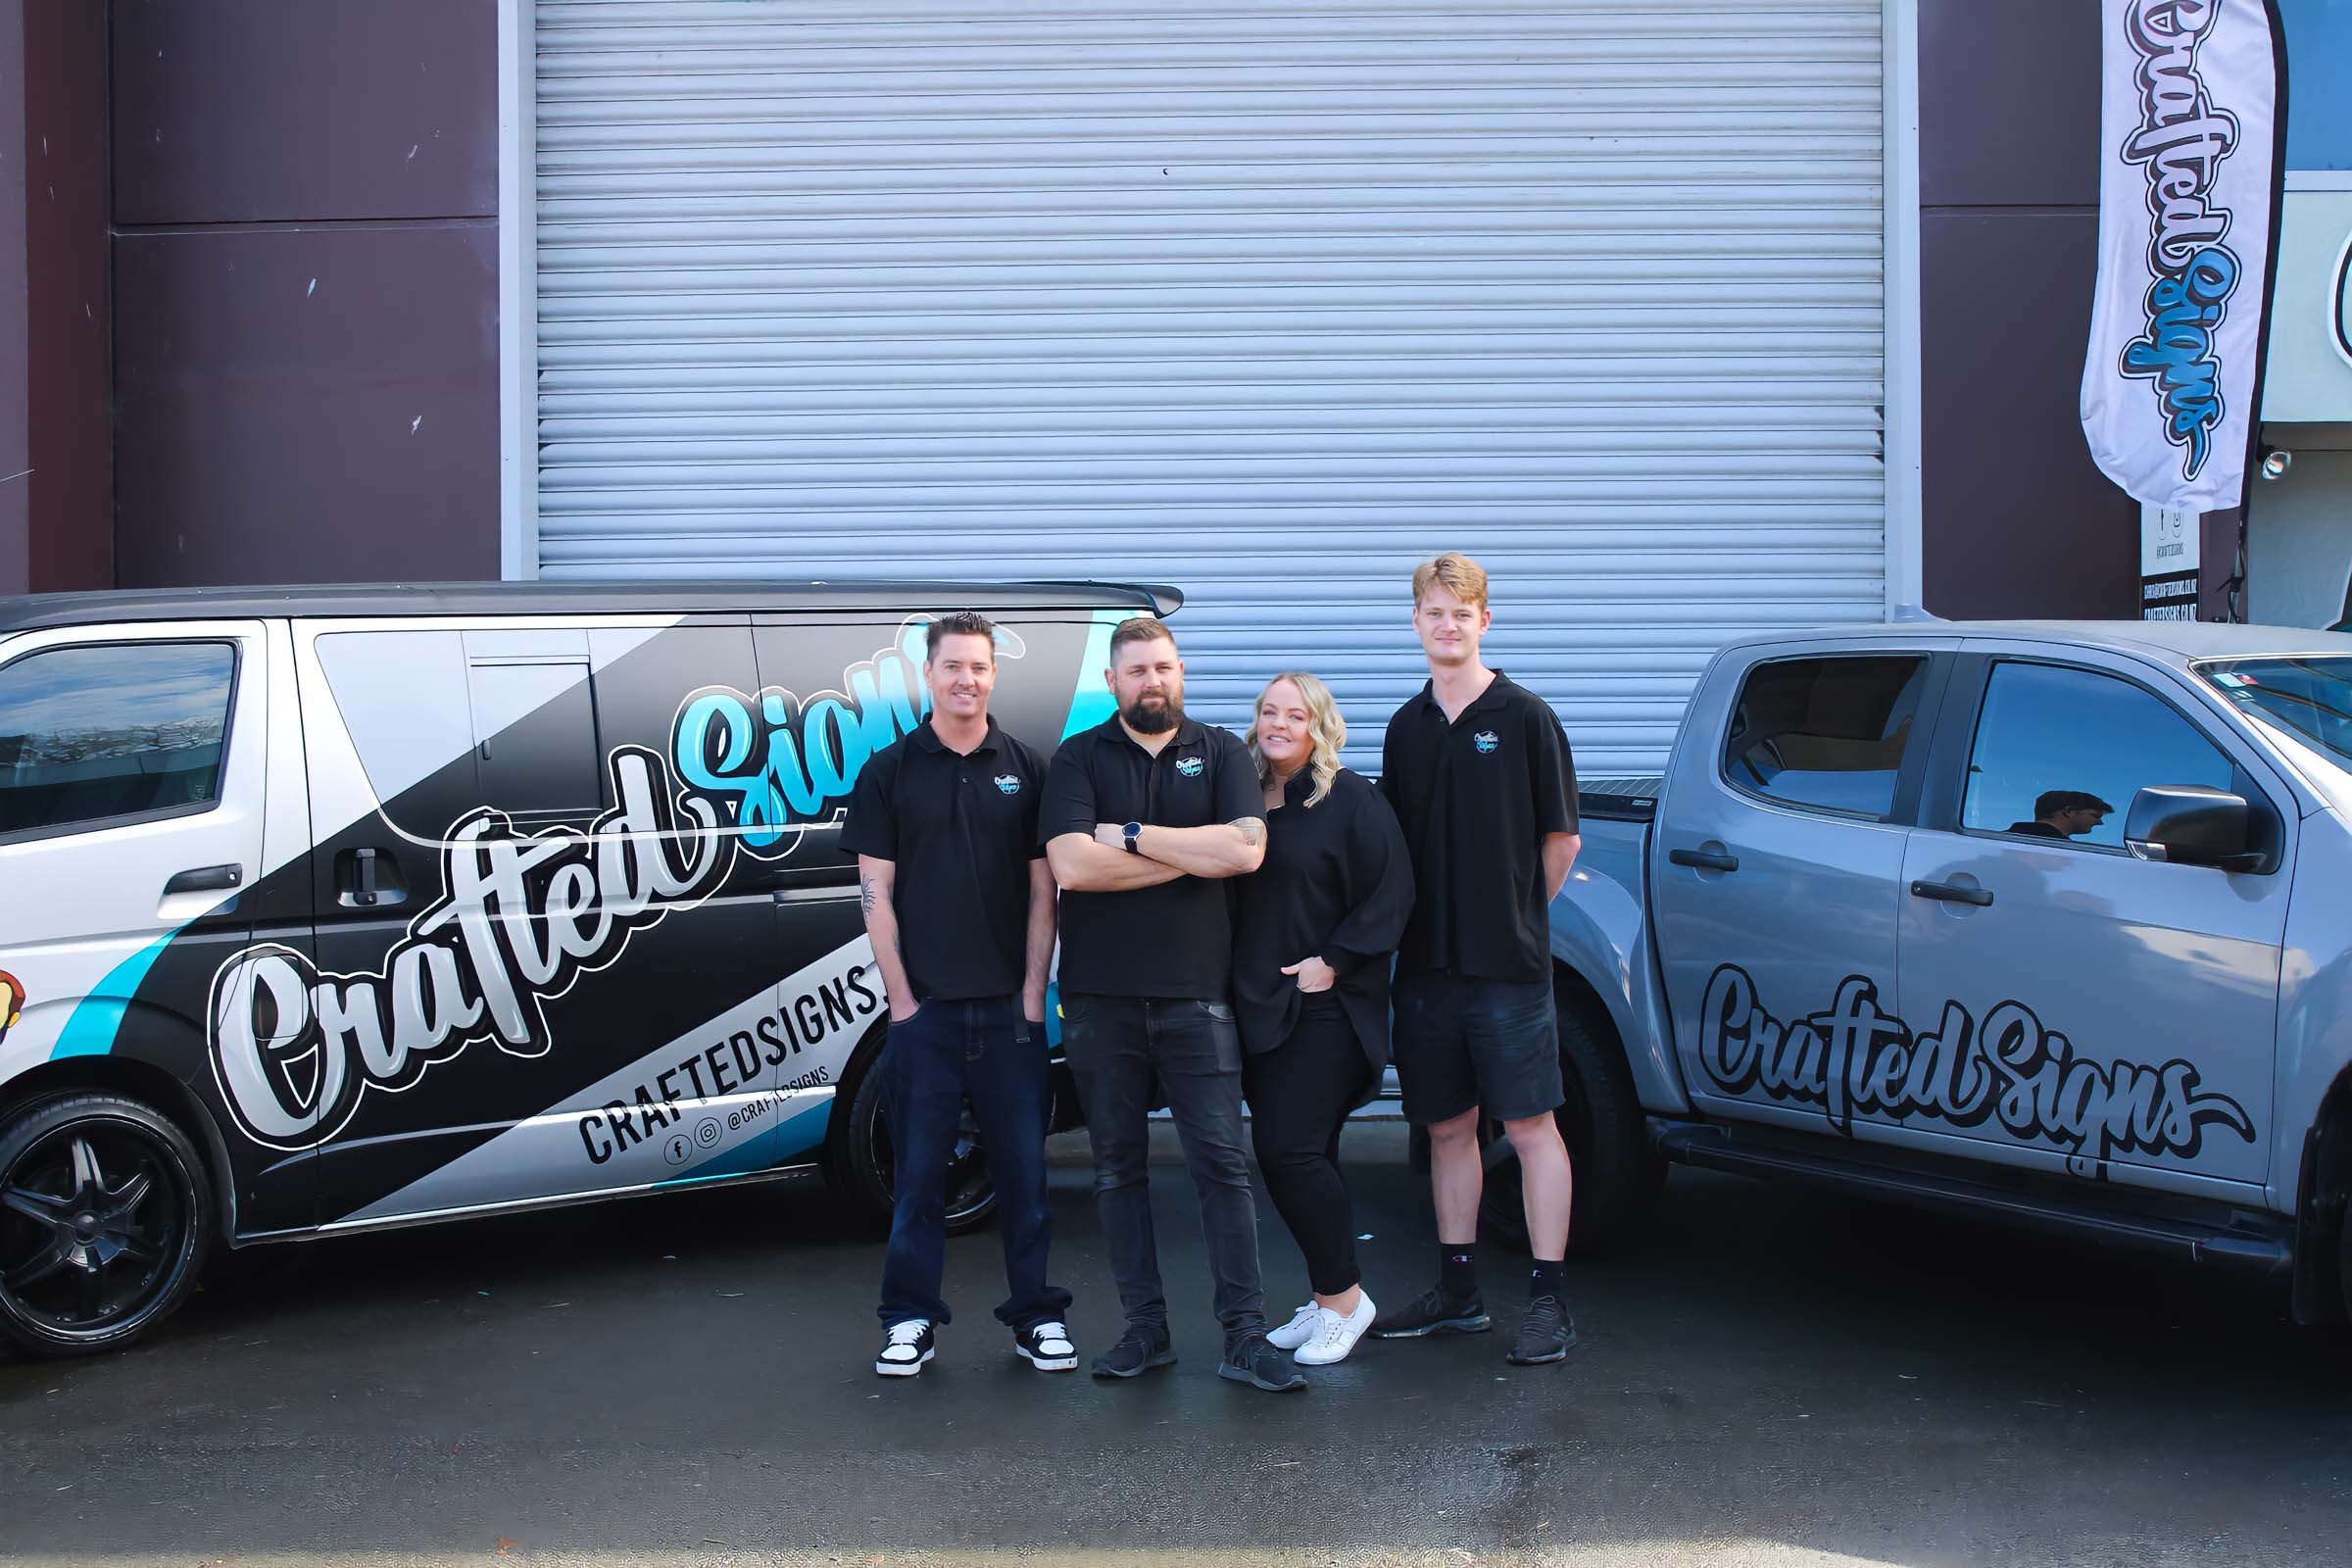 Crafted Signs Team - Sign Writing & Vehicle Wrap Specialists